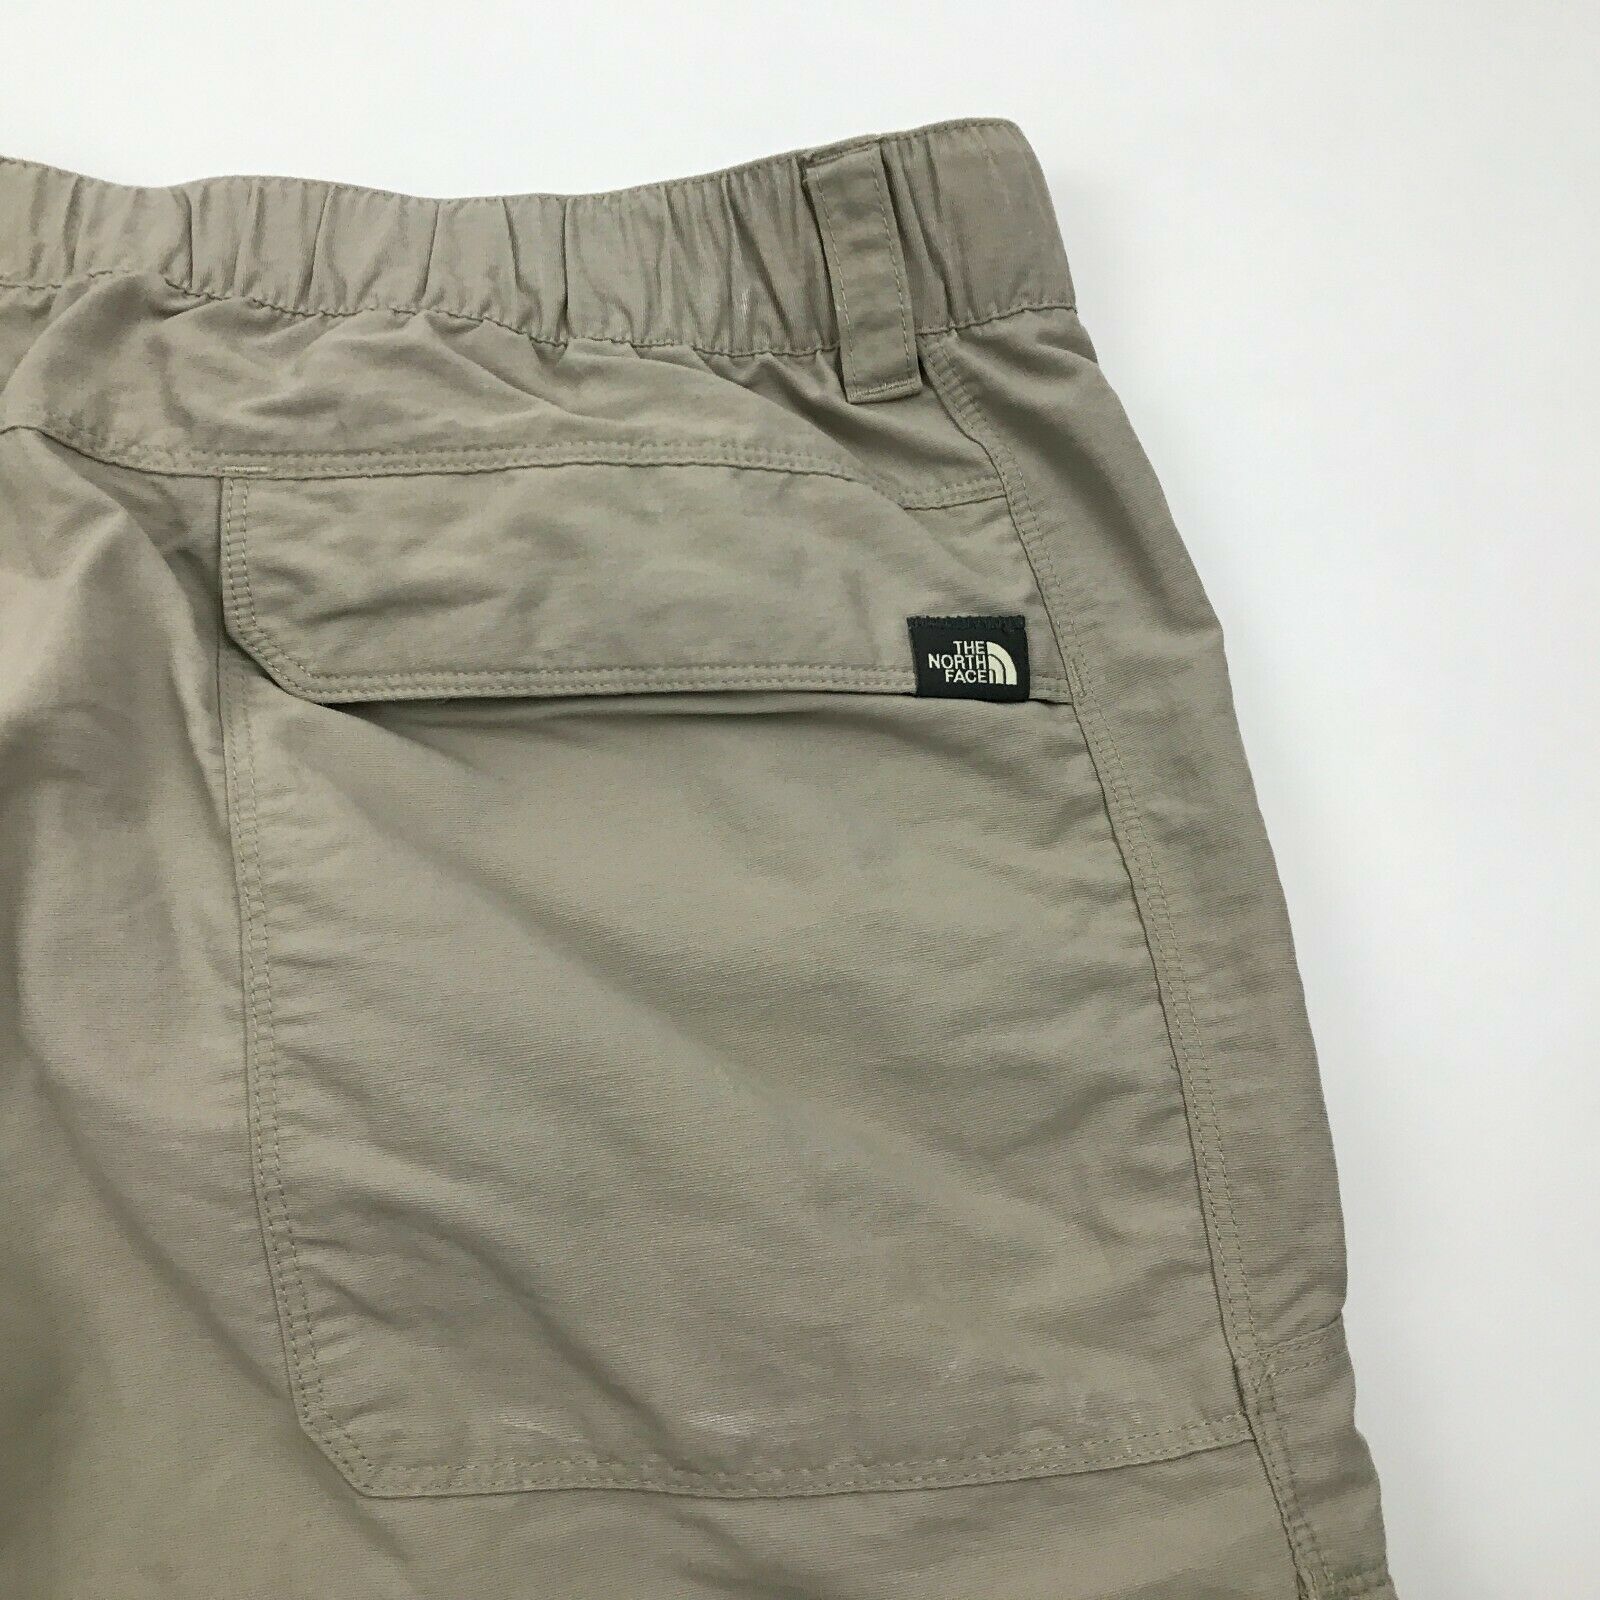 THE NORTH FACE Men's Convertible Cargo Pants Size XL Extra Large HYBRID ...